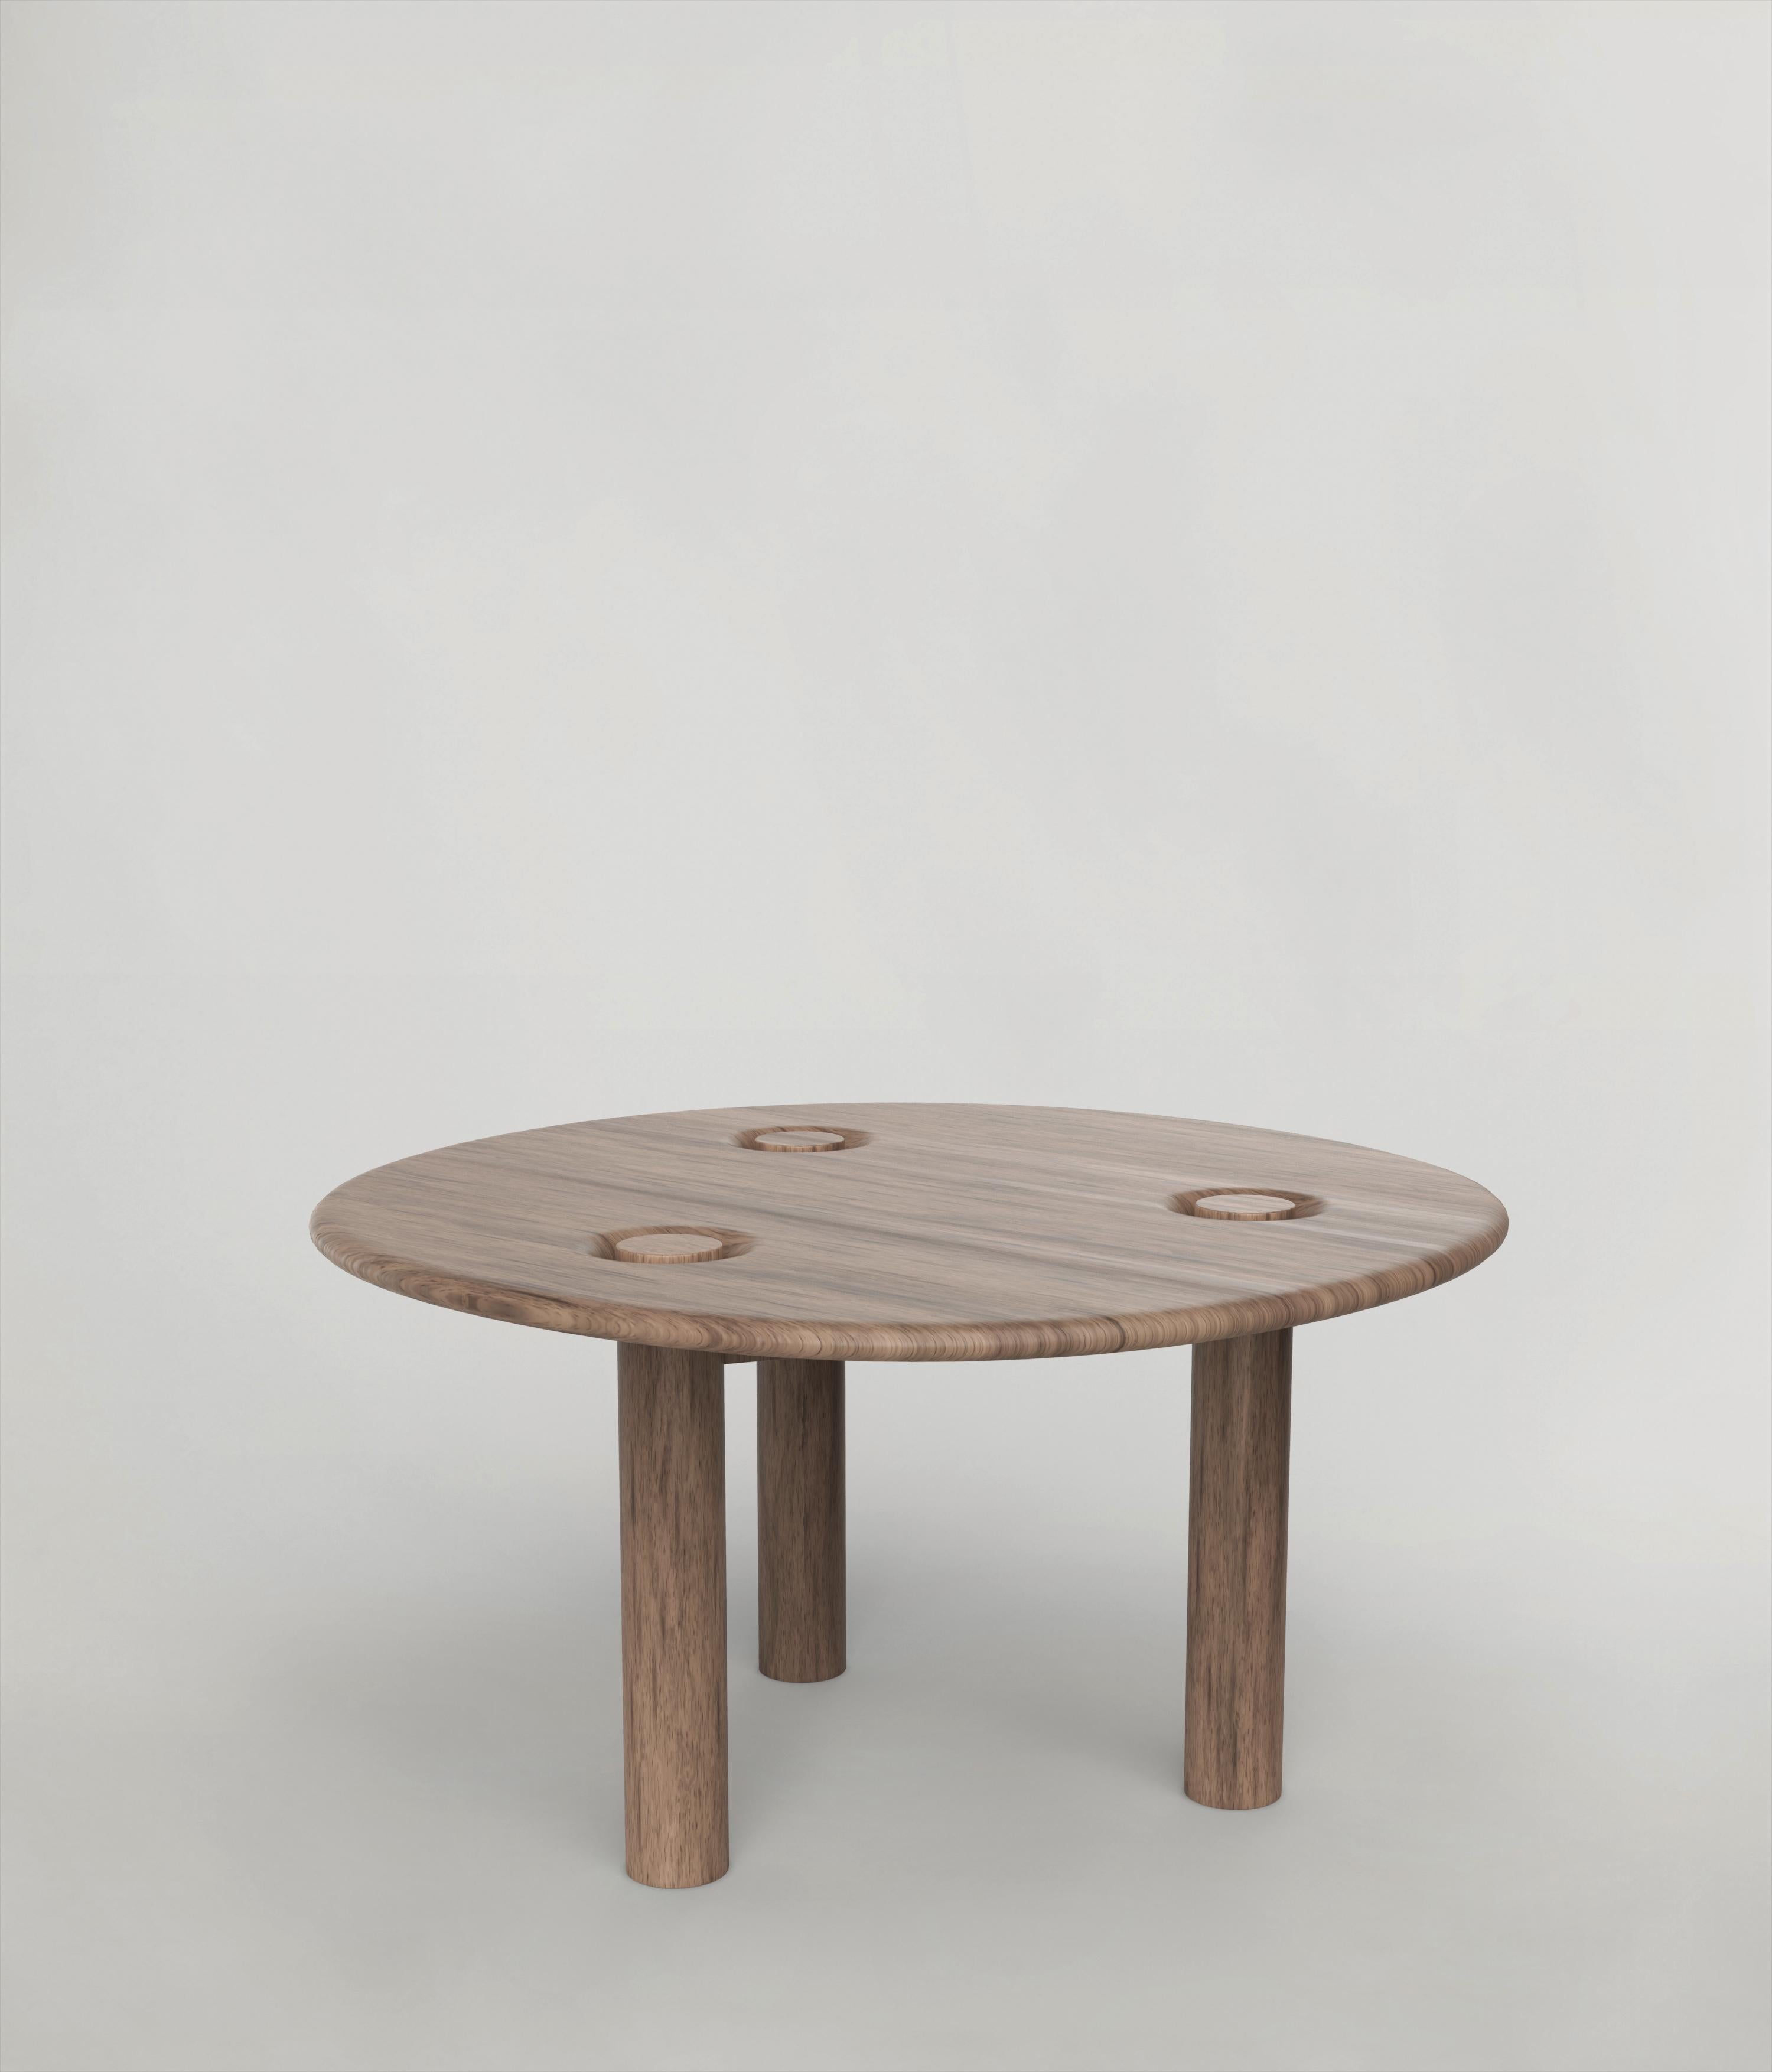 Italian Contemporary Limited Edition Signed Wood Table, Asido V3 by Edizione Limitata For Sale